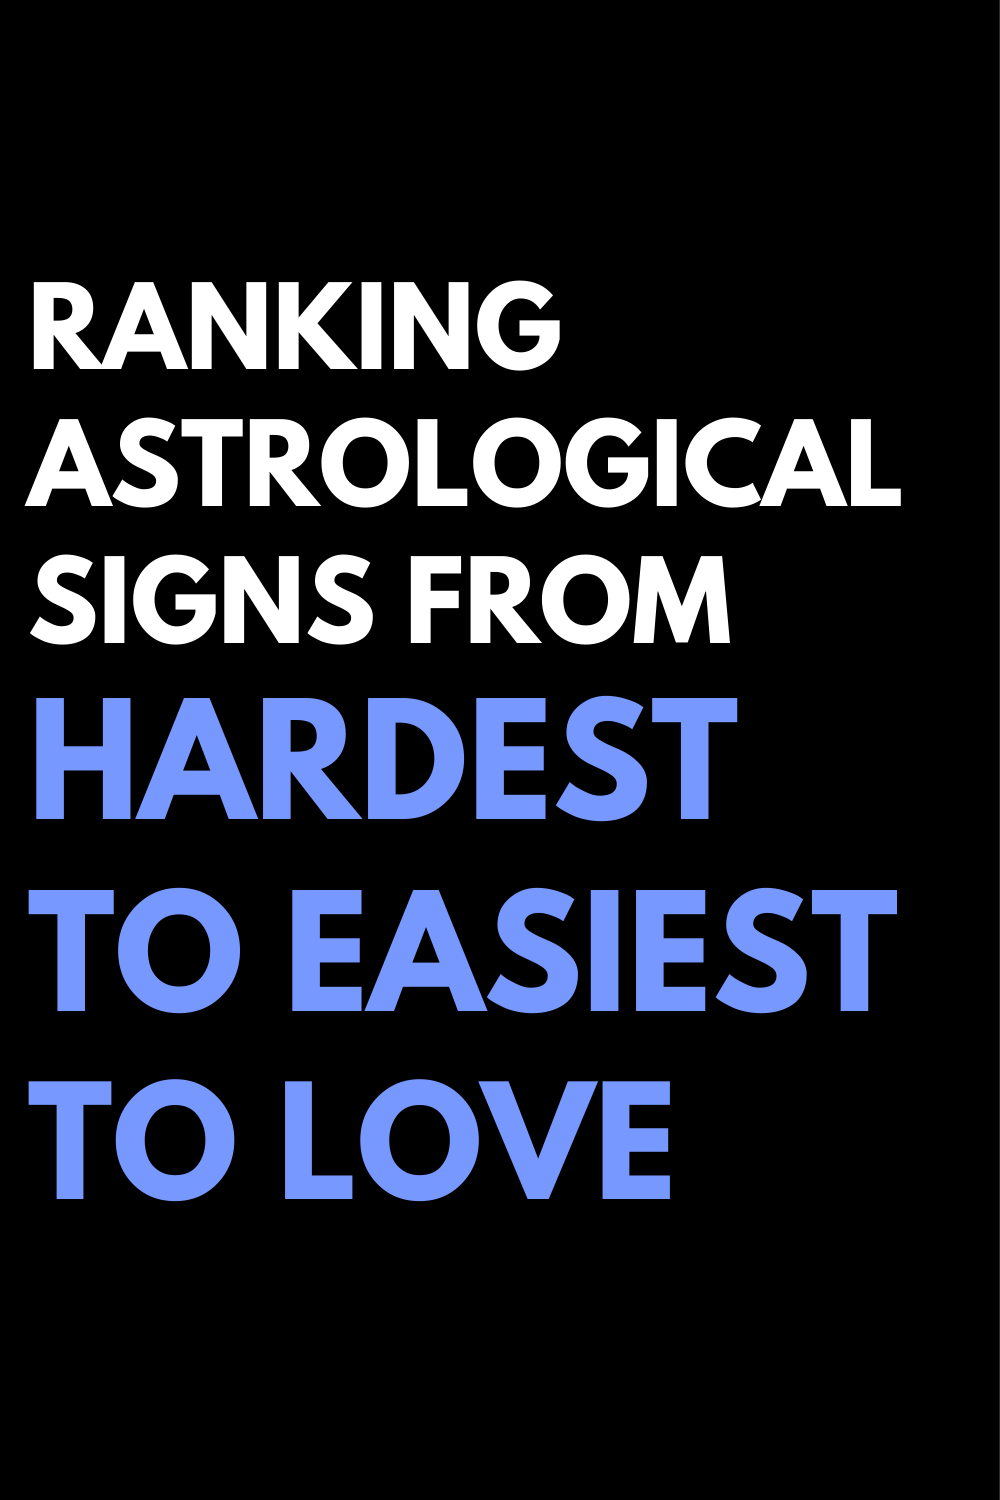 Ranking Astrological Signs From Hardest To Easiest To Love